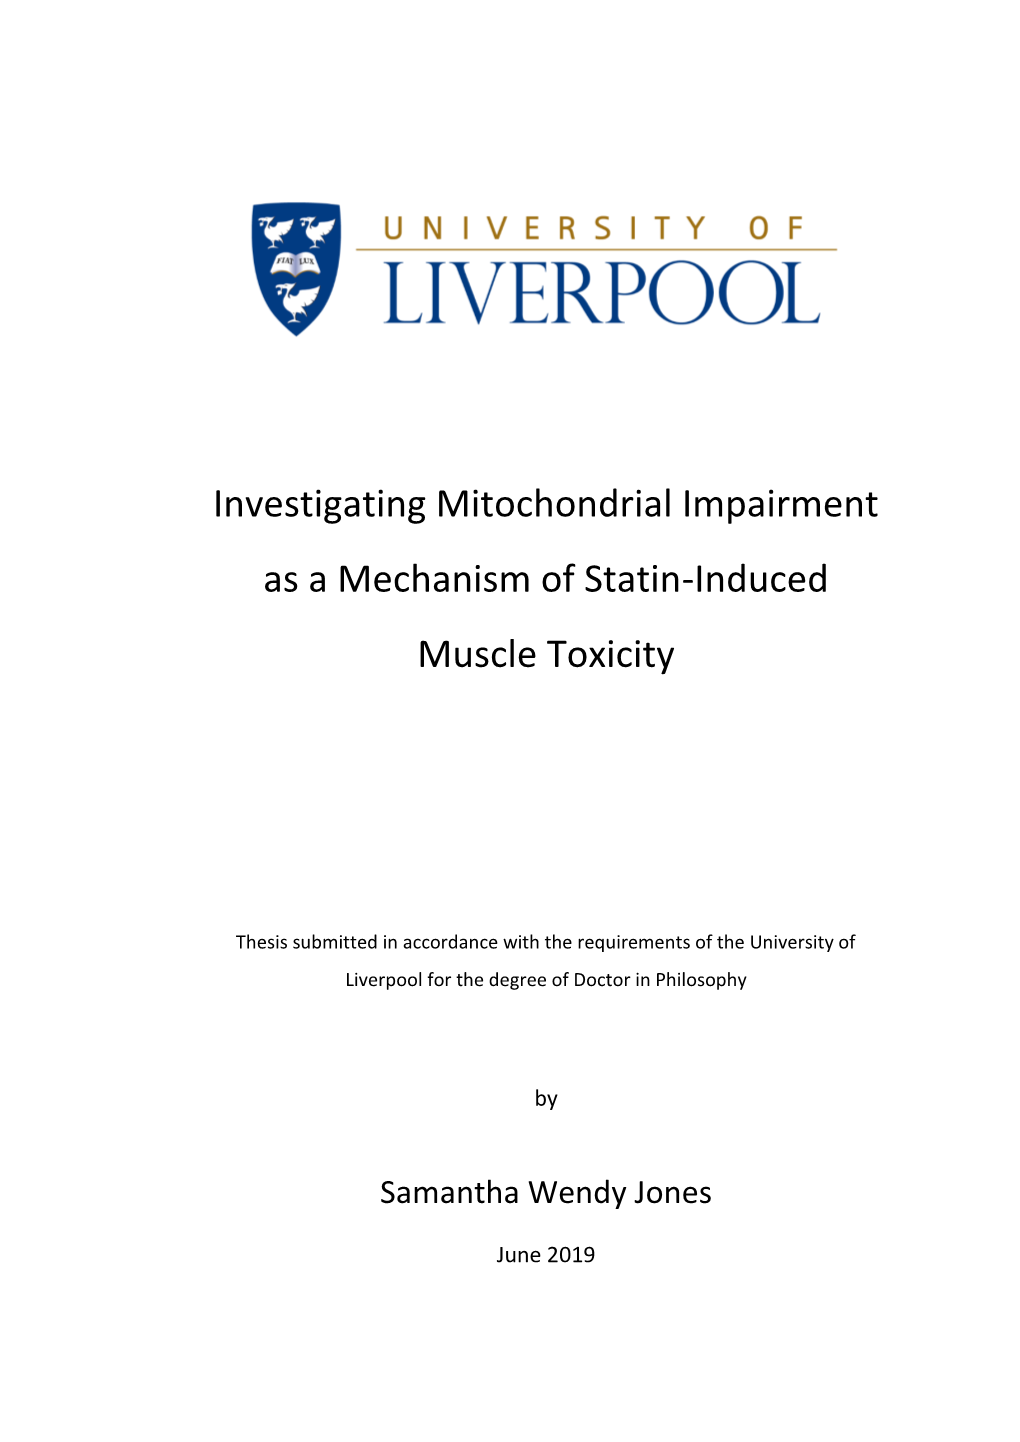 Investigating Mitochondrial Impairment As a Mechanism of Statin-Induced Muscle Toxicity